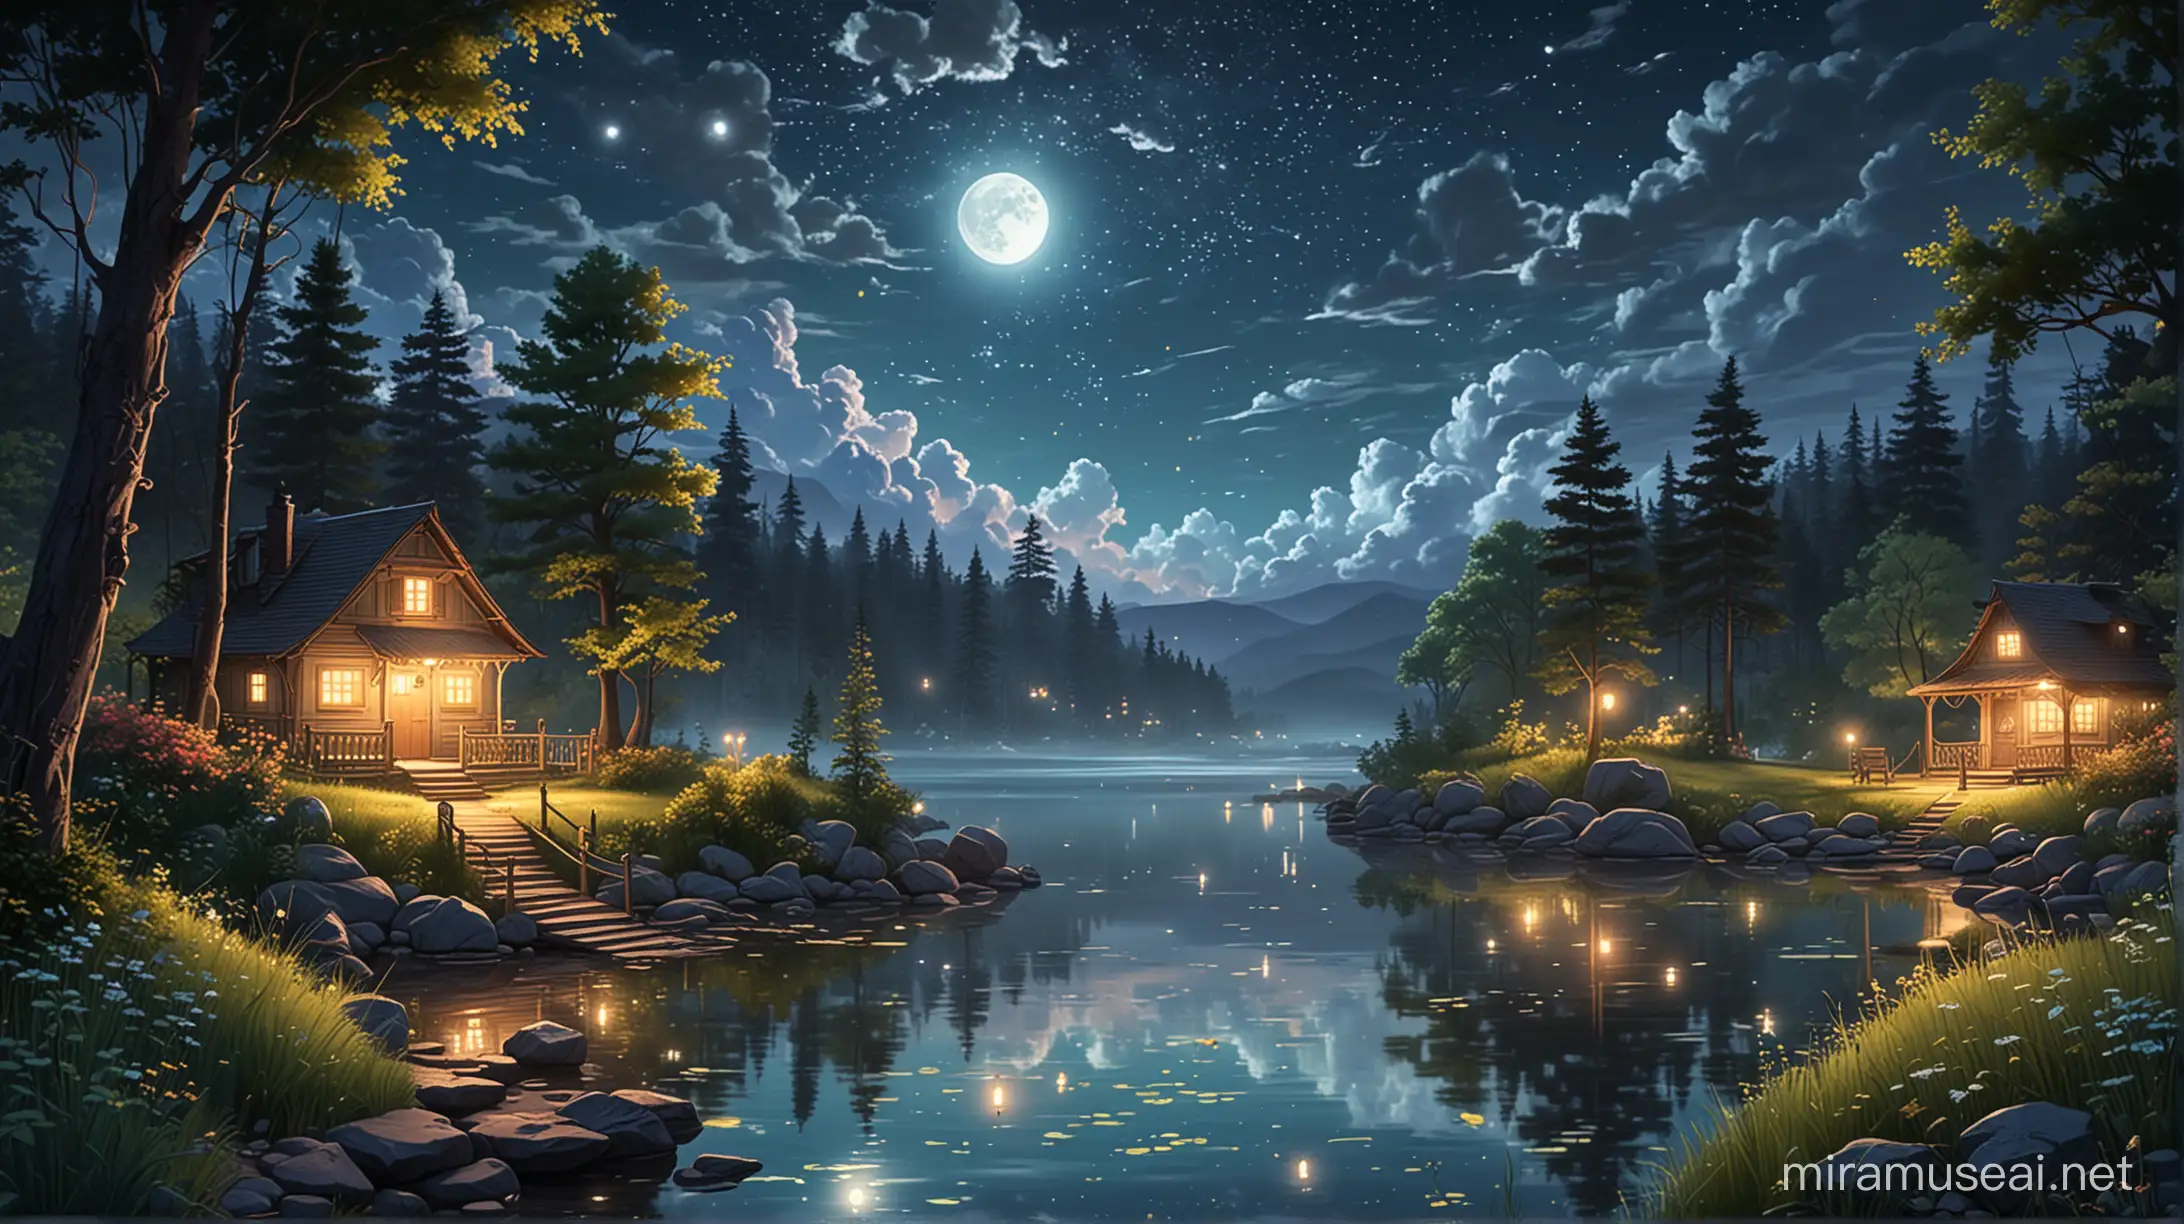 A whimsical and enchanting summer night scene in cartoon style. The sky is a canvas of twinkling stars, fluffy clouds, and a shining moon emitting a soft glow. The landscape is filled with leafy trees, a serene lake, and lush grass, with bushes and rocks scattered throughout. Fireflies illuminate the forest, adding a touch of magic to the atmosphere. The overall ambiance of the image is tranquil and dreamy, perfect for a nighttime escape.